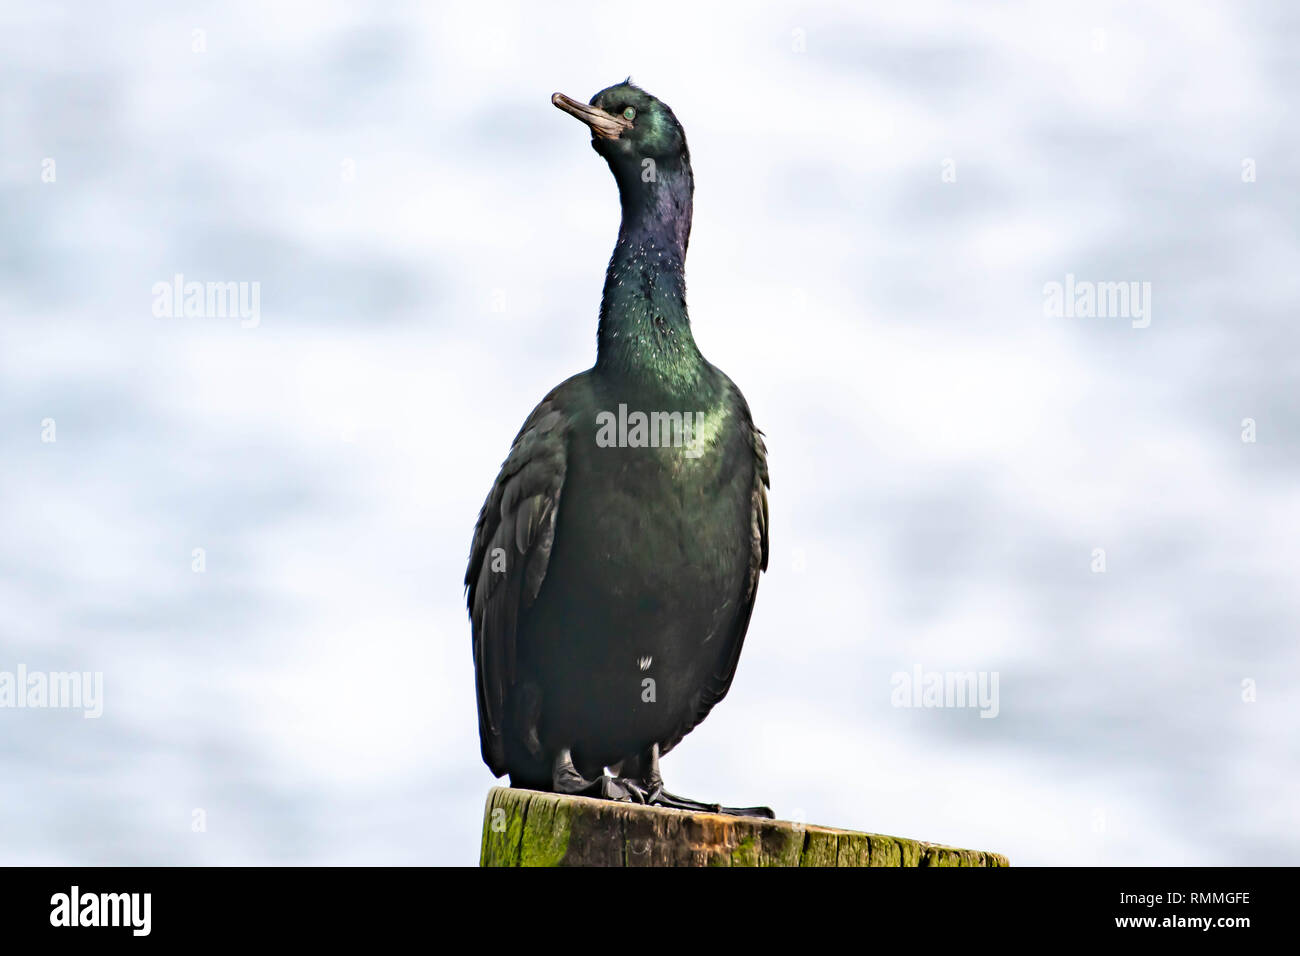 Portrait of a cormorant on a wooden post, British Columbia, Canada Stock Photo